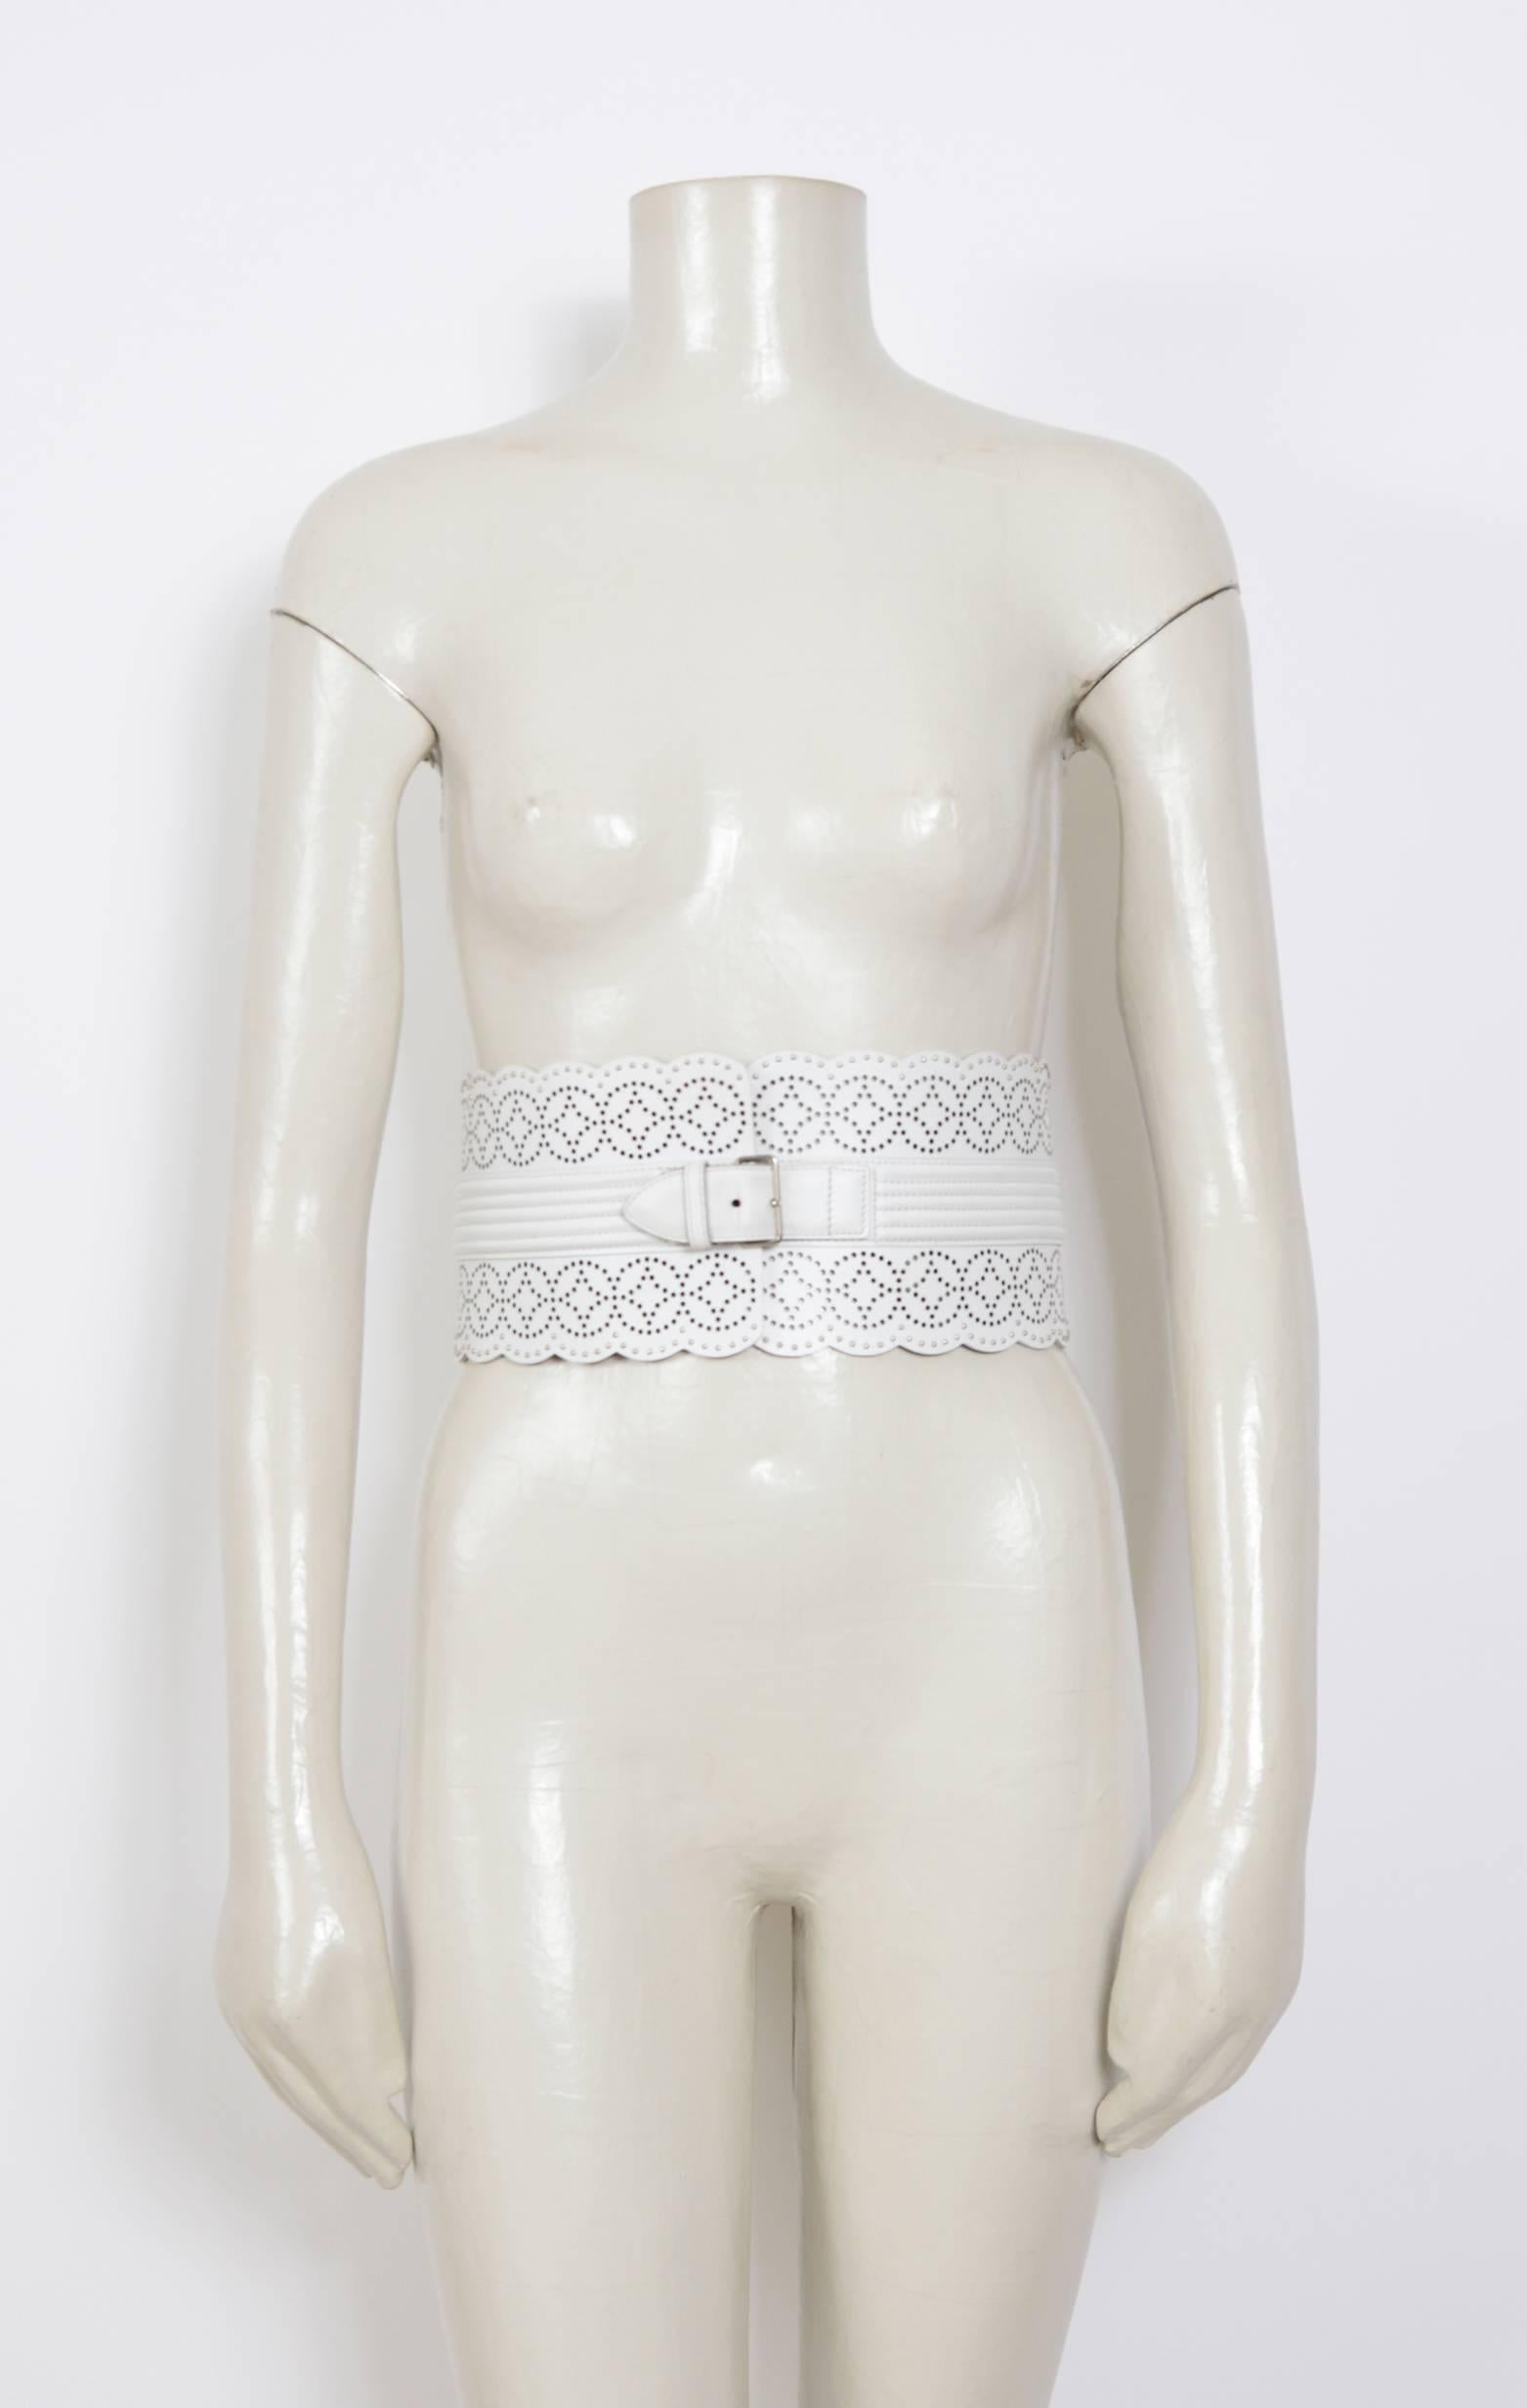 This Alaia belt is composed of white leather with a laser-cut detailing and small metal studs. 
Features a center front adjustable buckle. 
In excellent pre-owned condition, slight signs of wear.
Size 70 